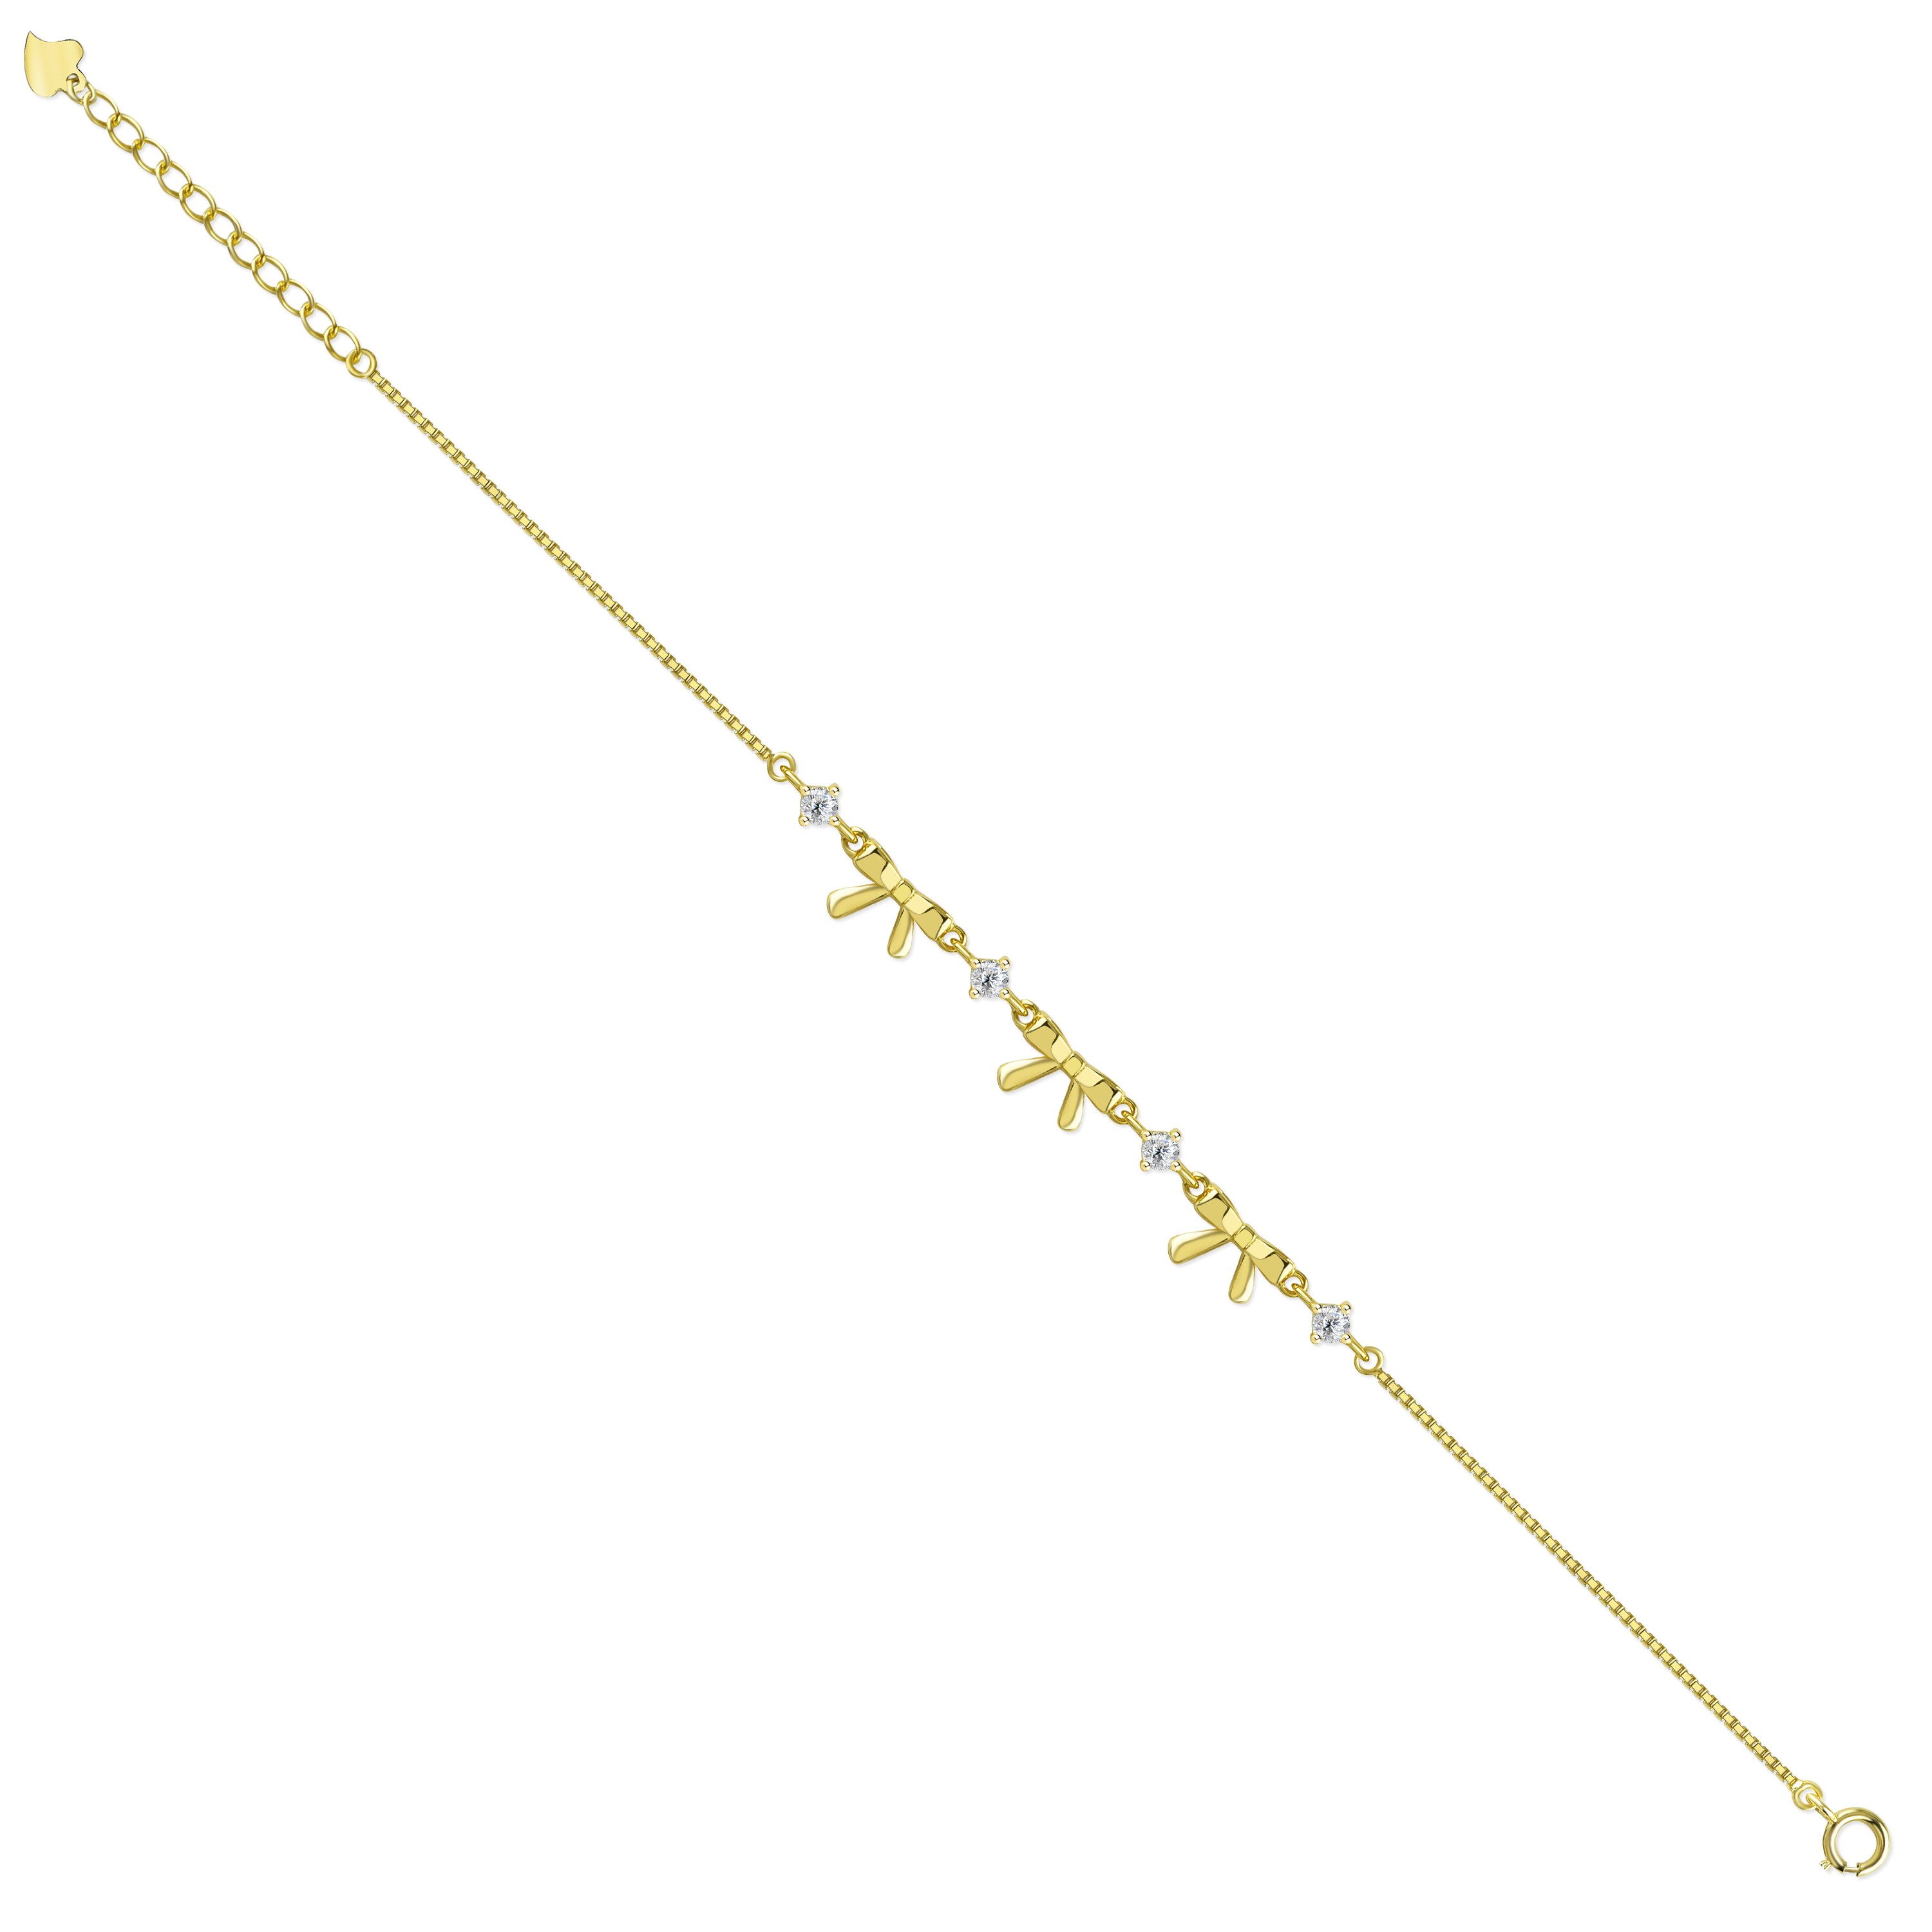 THE REPEATING BOW BRACELET - Gold